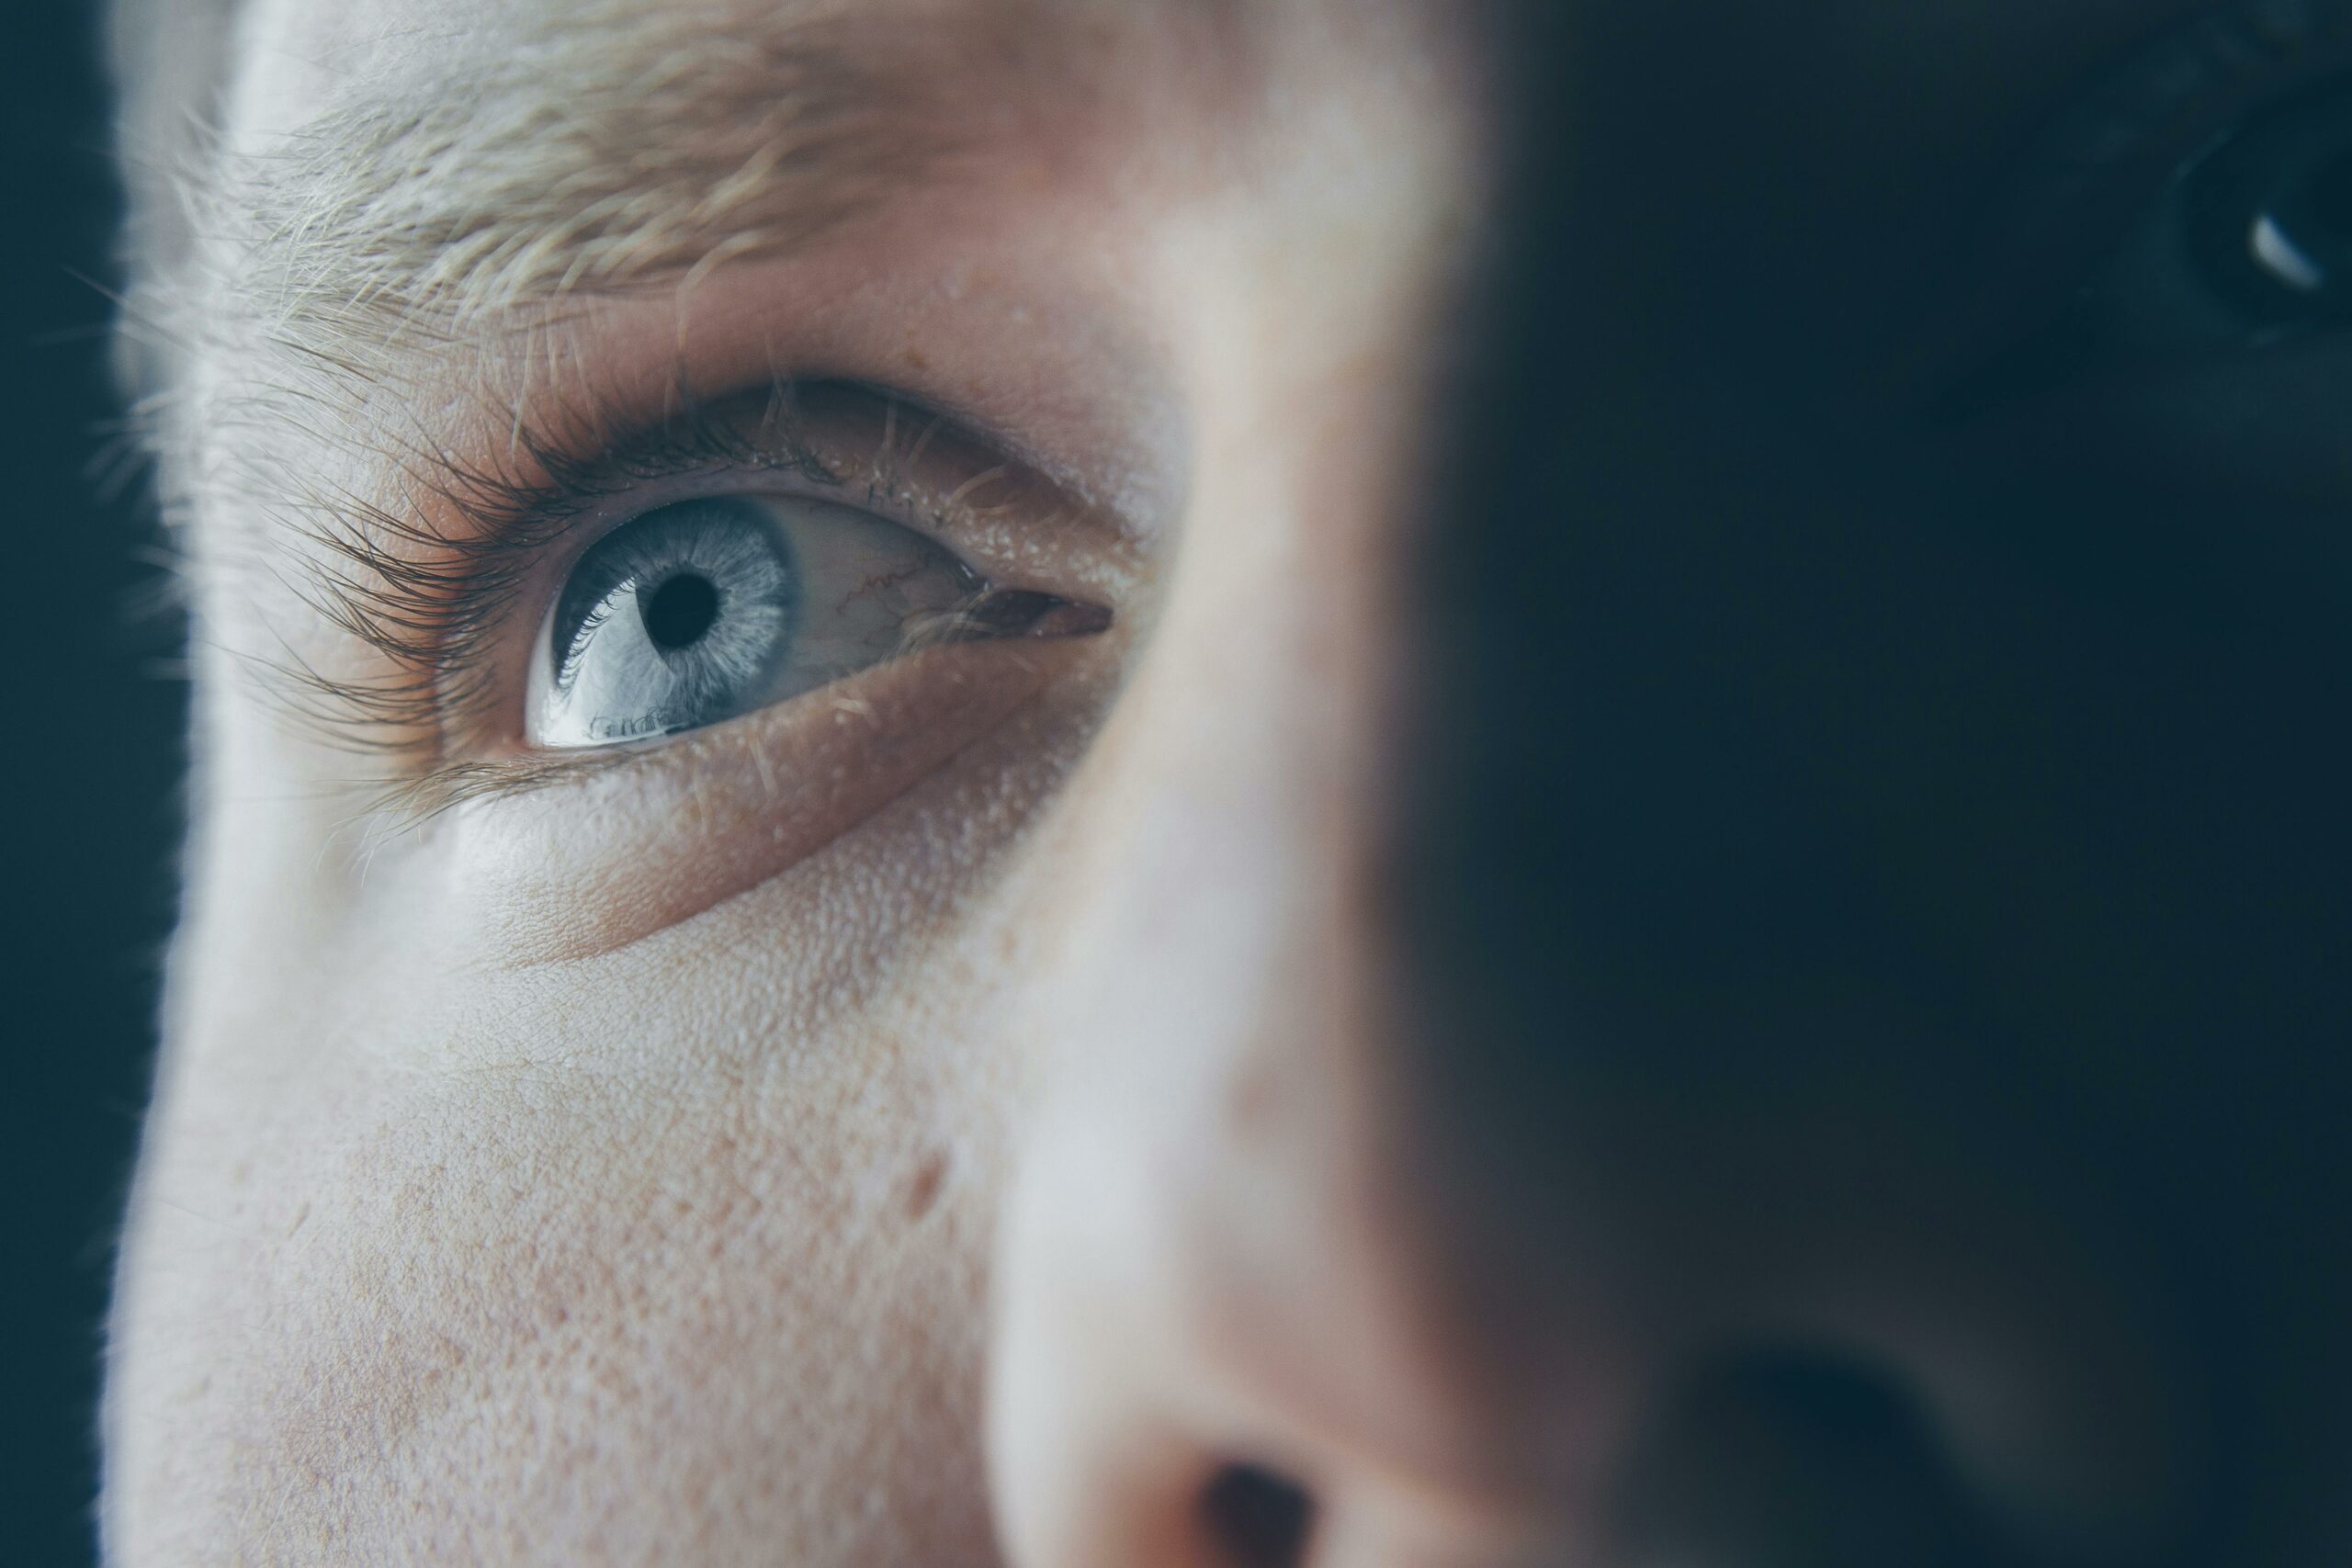 What is EMDR- Eye Movement Desensitization and Reprocessing?